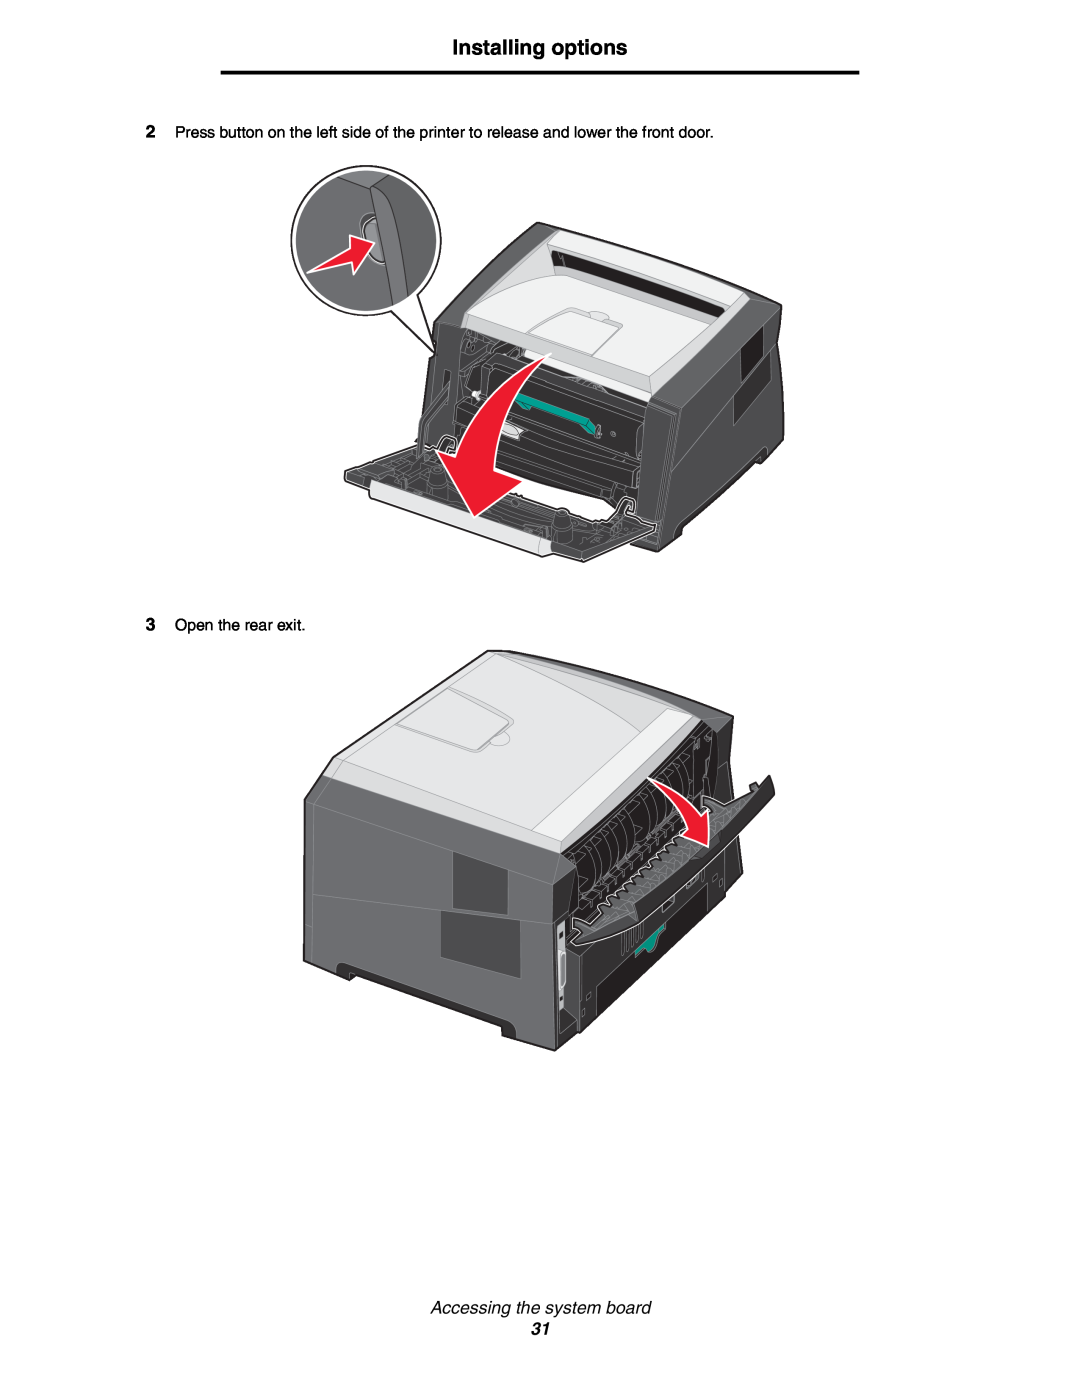 Lexmark 450dn manual Installing options, Accessing the system board 